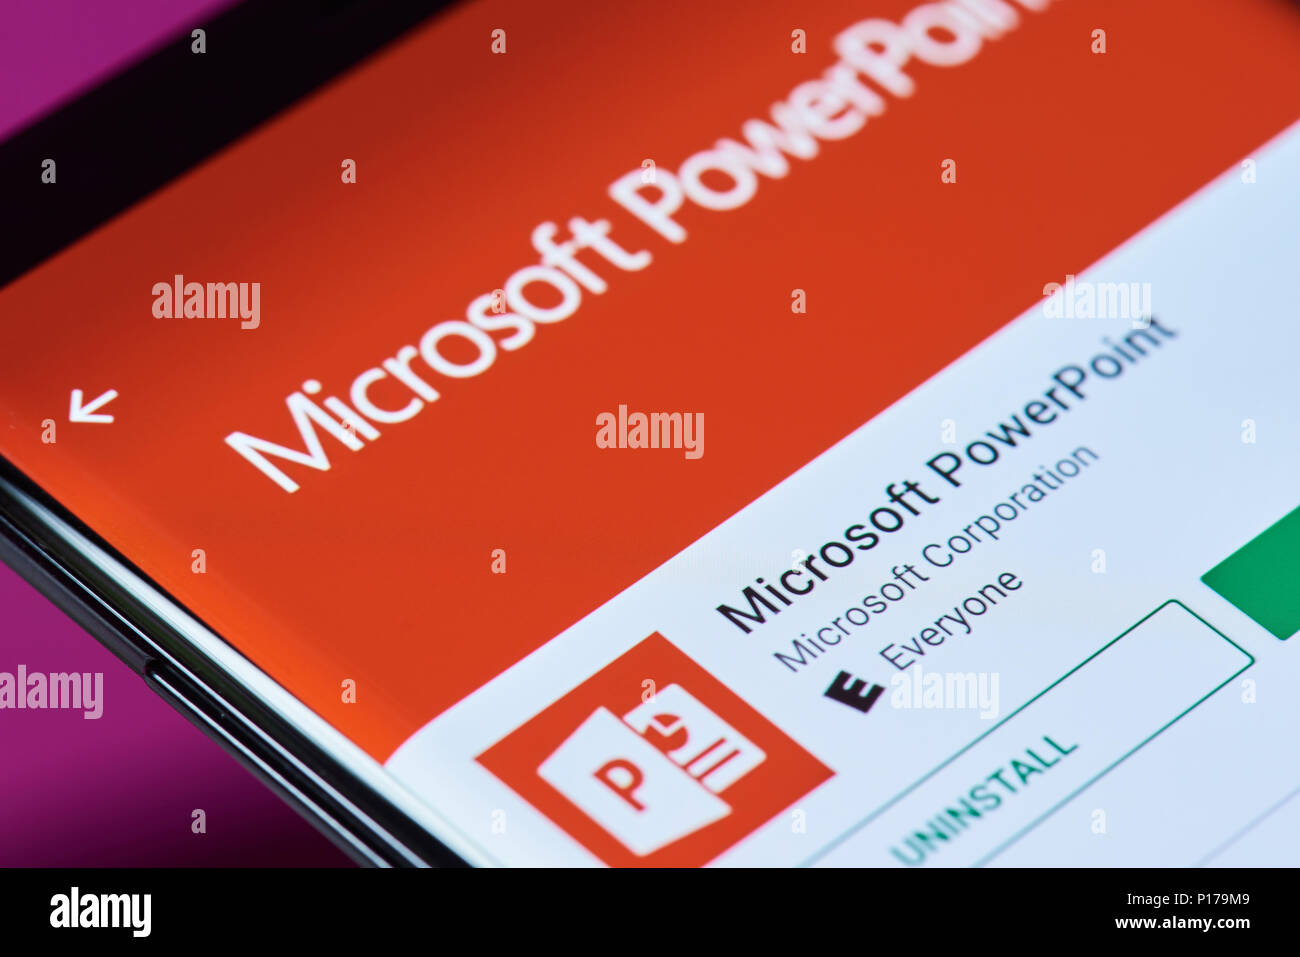 New york, USA - June 10, 2018: Microsoft powerpoint application on android smartphone screen close up view Stock Photo